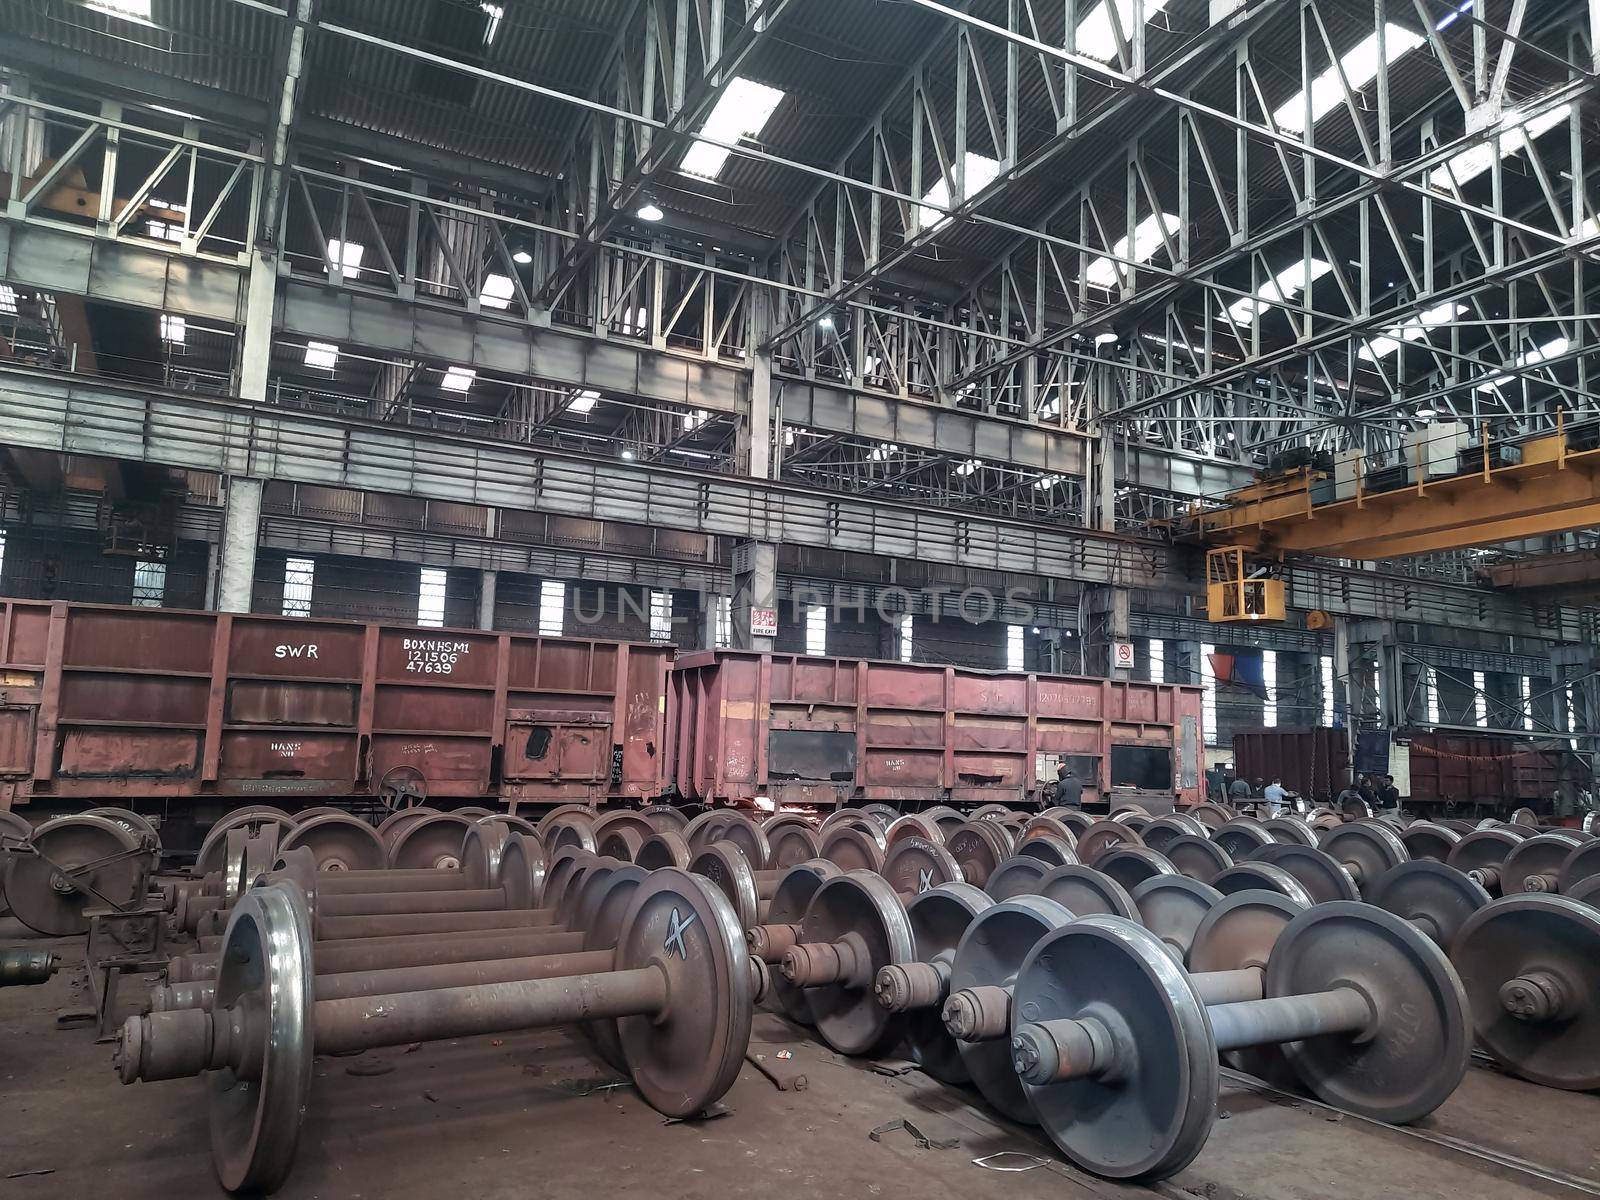 Spare railway wheels on the axle in a repair workshop by tabishere